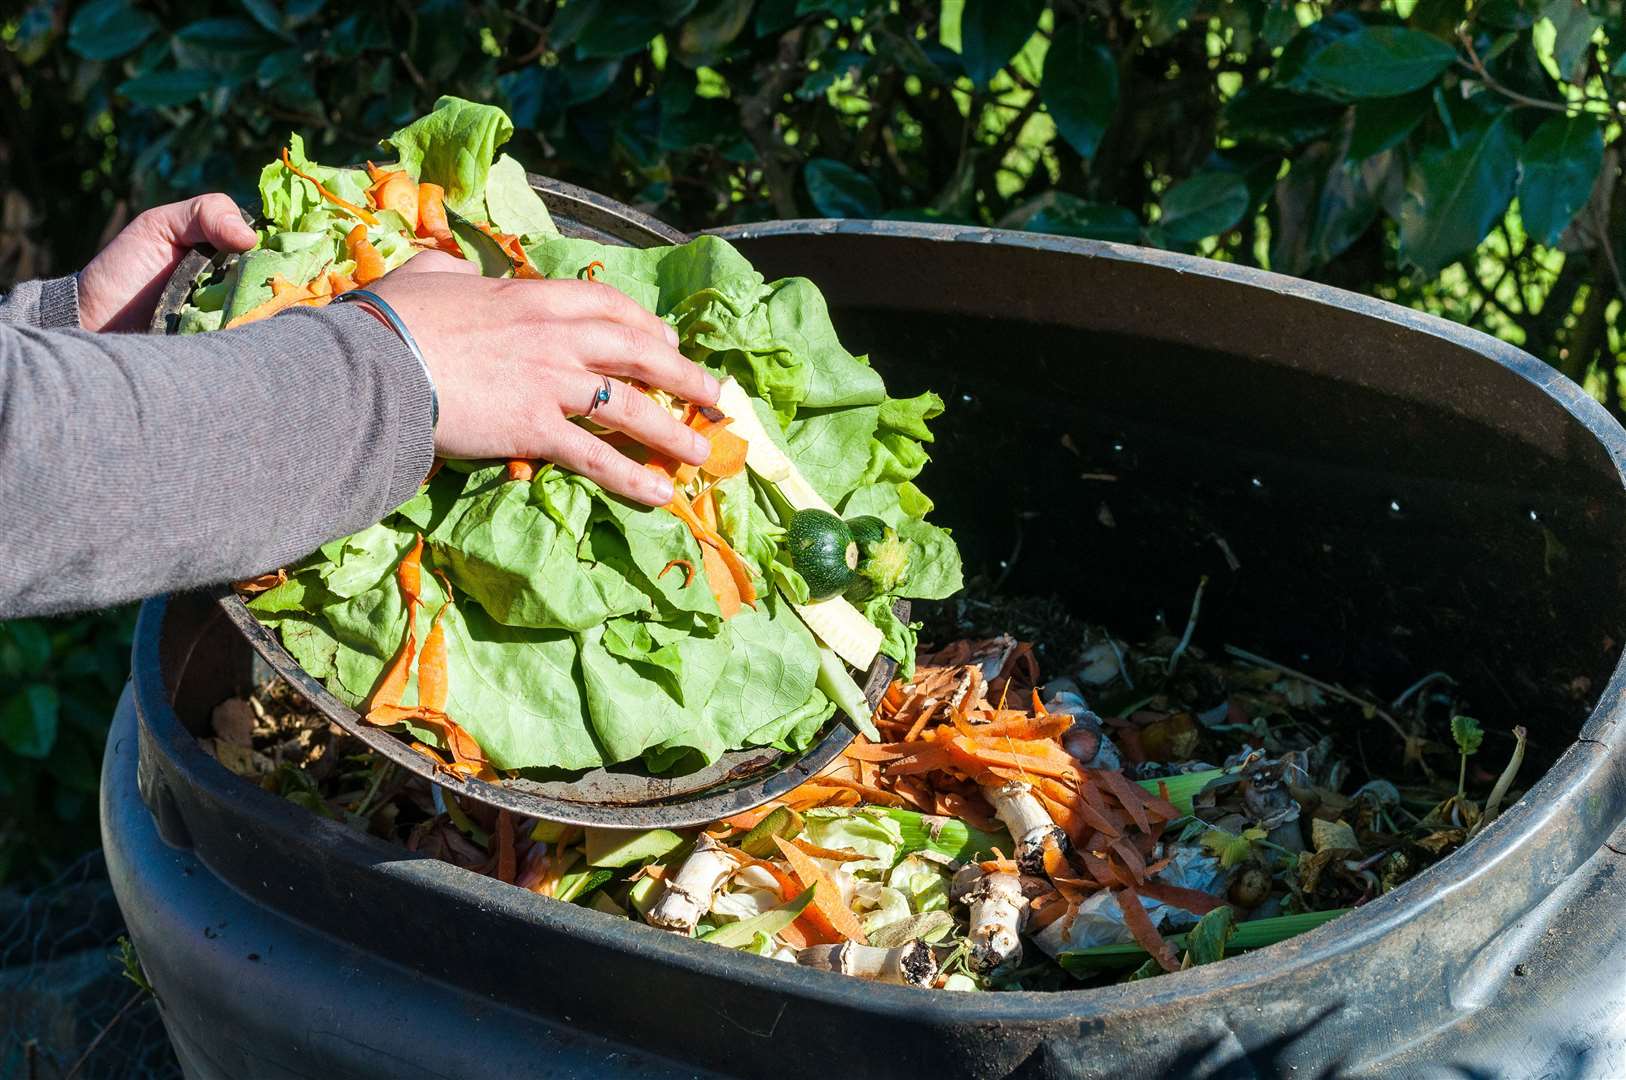 Use a compost bin or heap and feel the benefits.